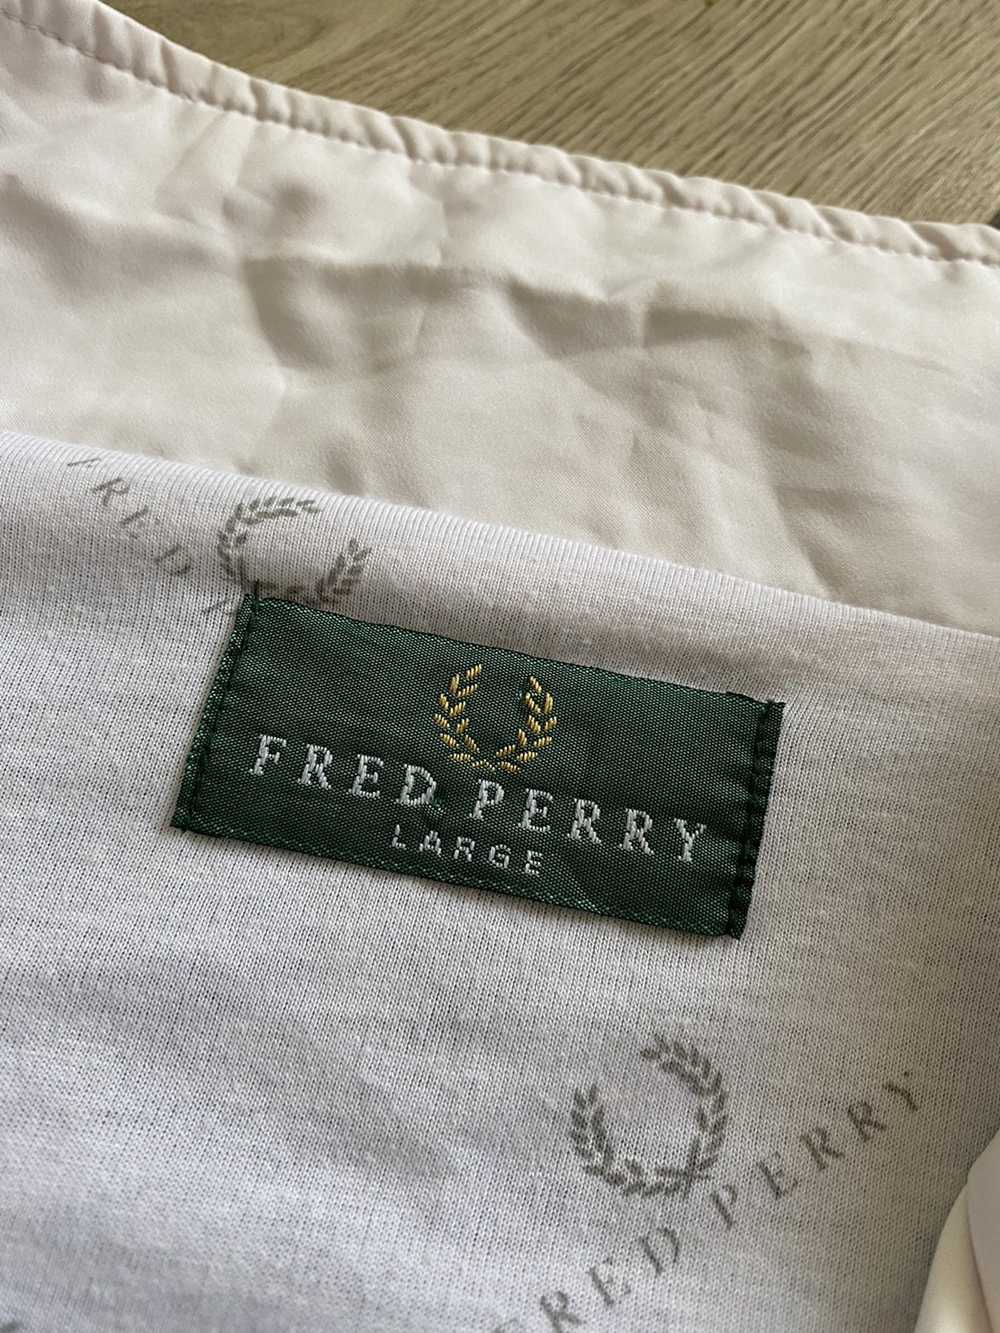 Fred Perry × Rare × Vintage Vintage Fred Perry Zi… - image 9